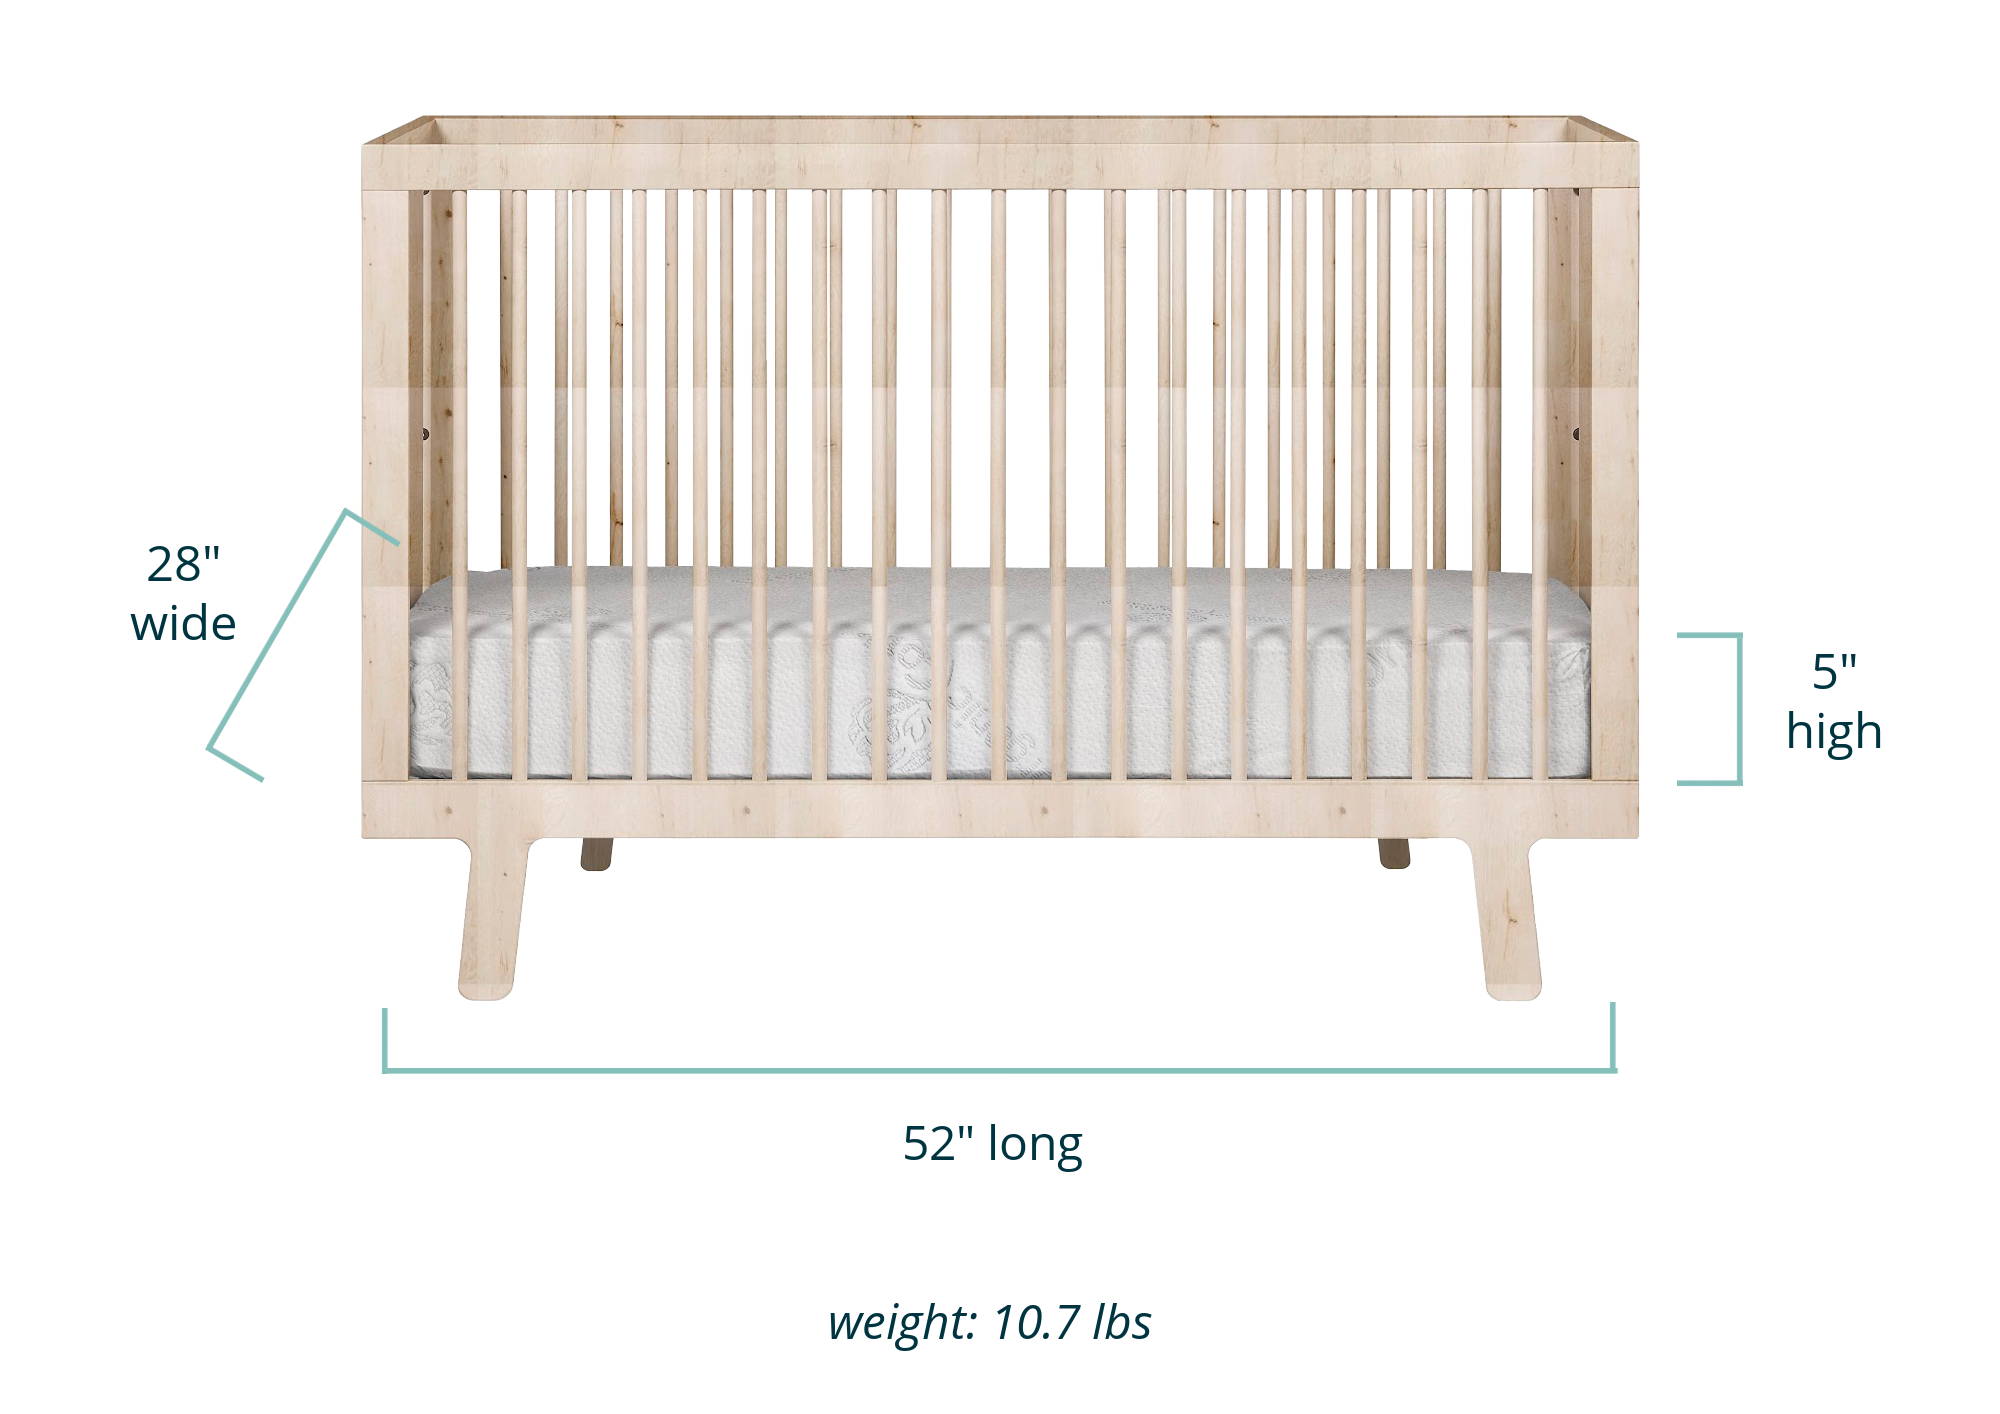 Traditions crib mattress in a crib showing dimensions of 28